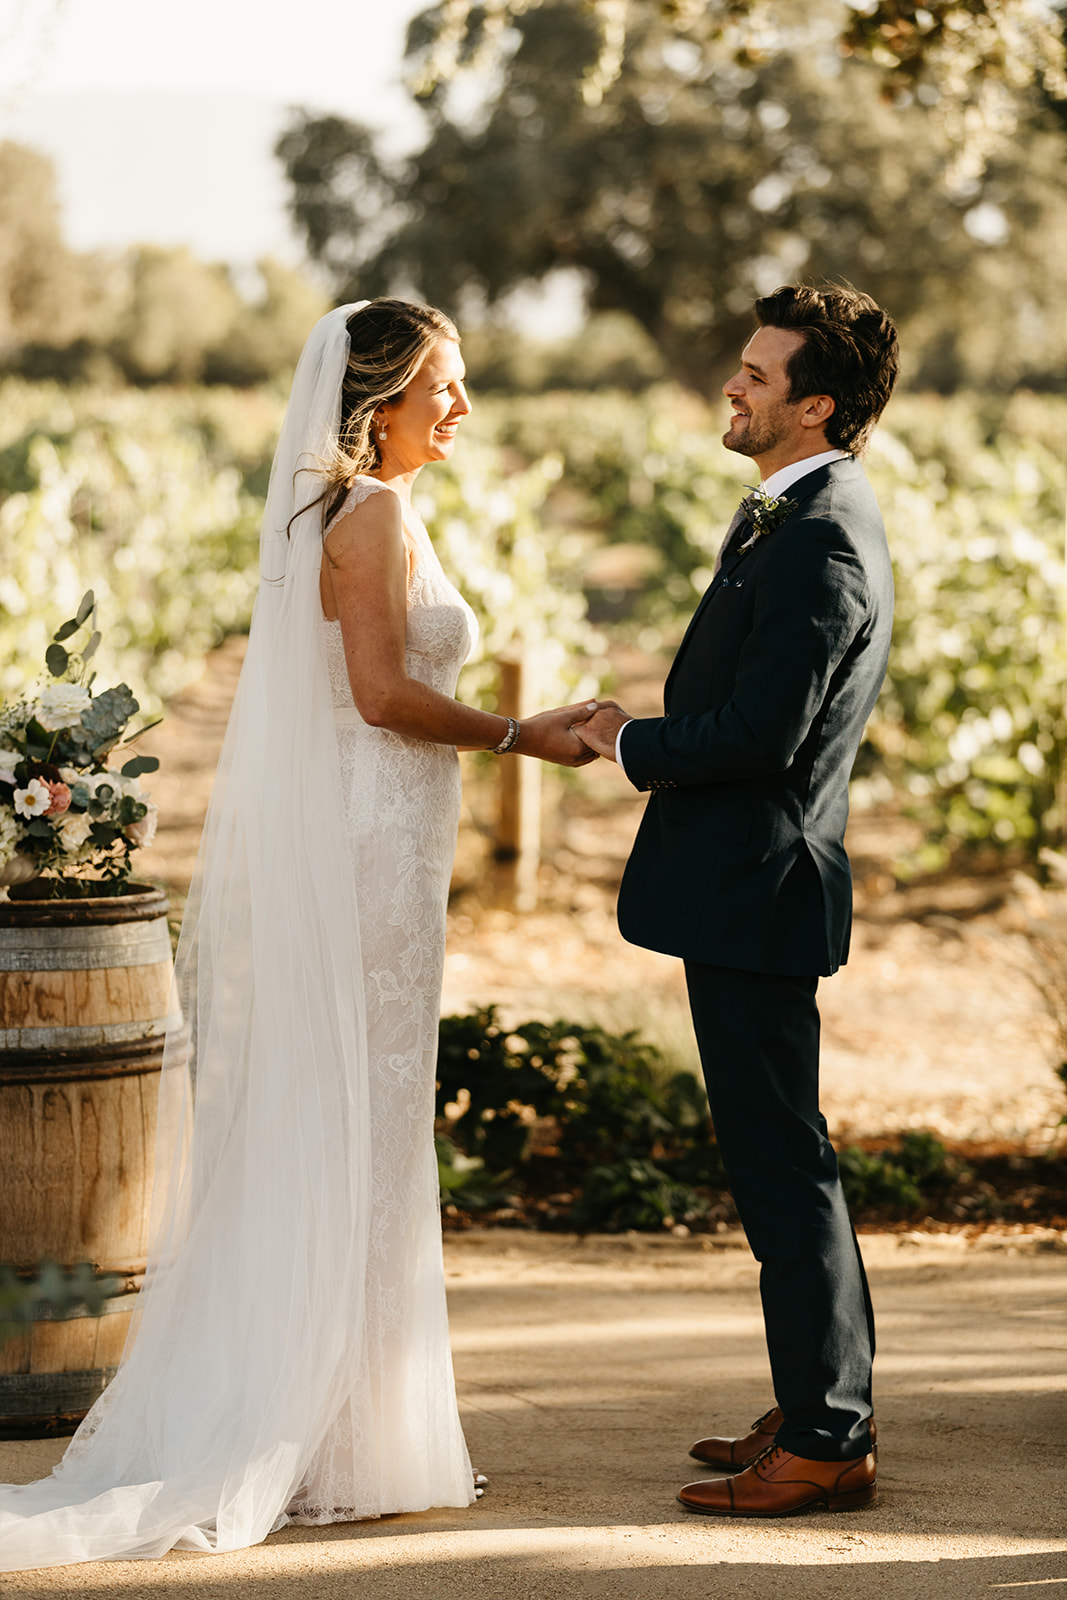 Intimate vineyard wedding ceremony at Roblar winery with 20 people